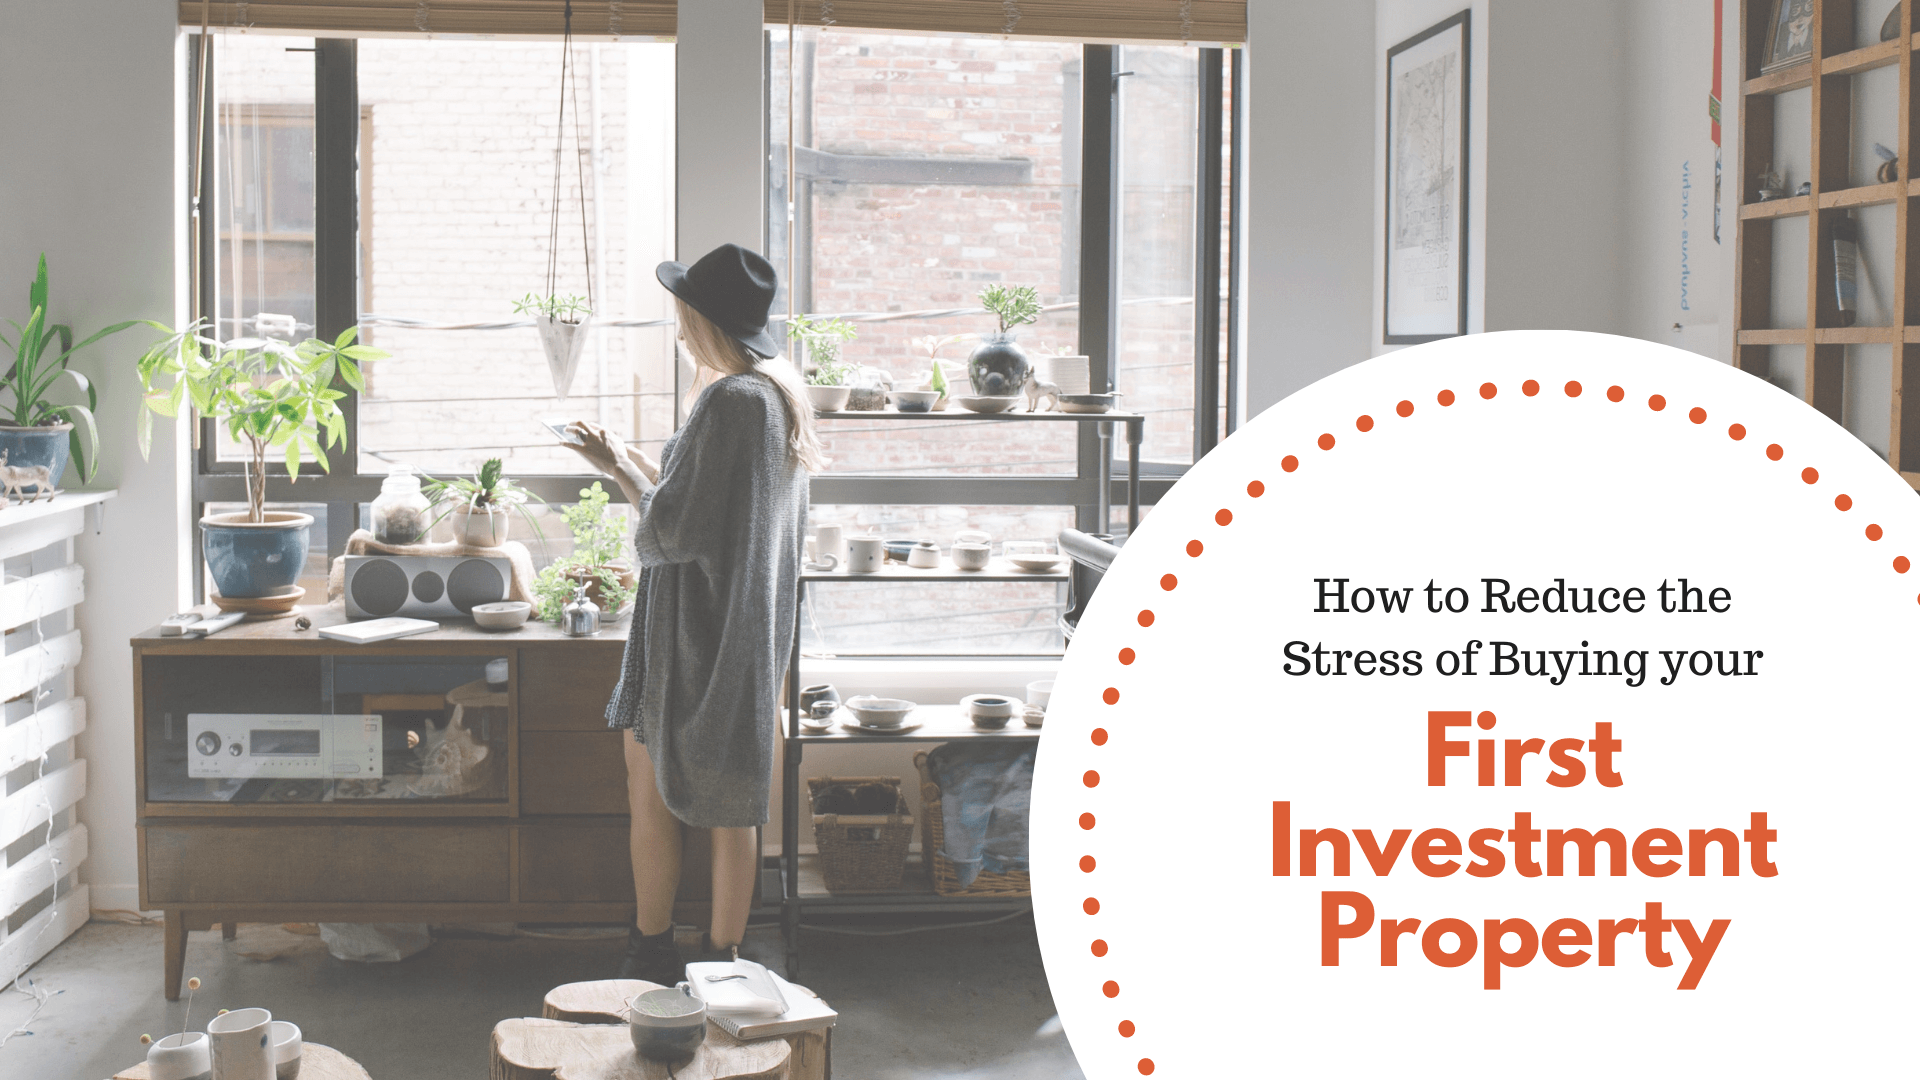 How to Reduce the Stress of Buying your First Pocatello Investment Property